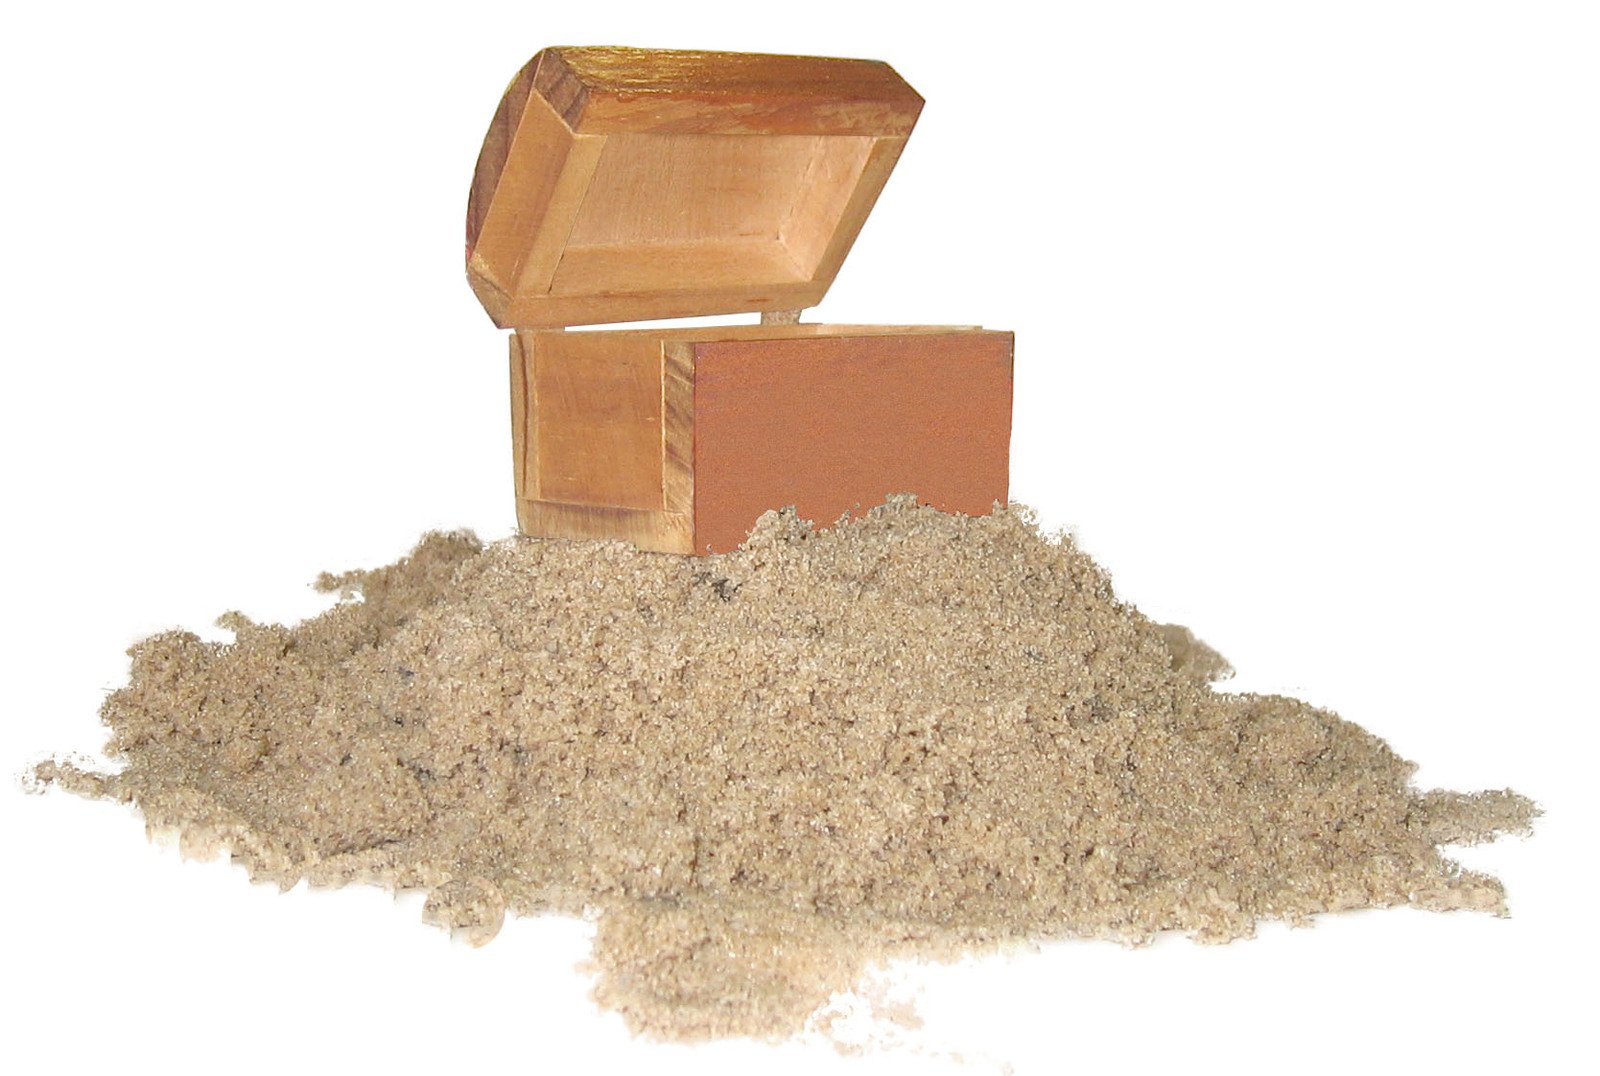 a square wooden box is full of brown sand